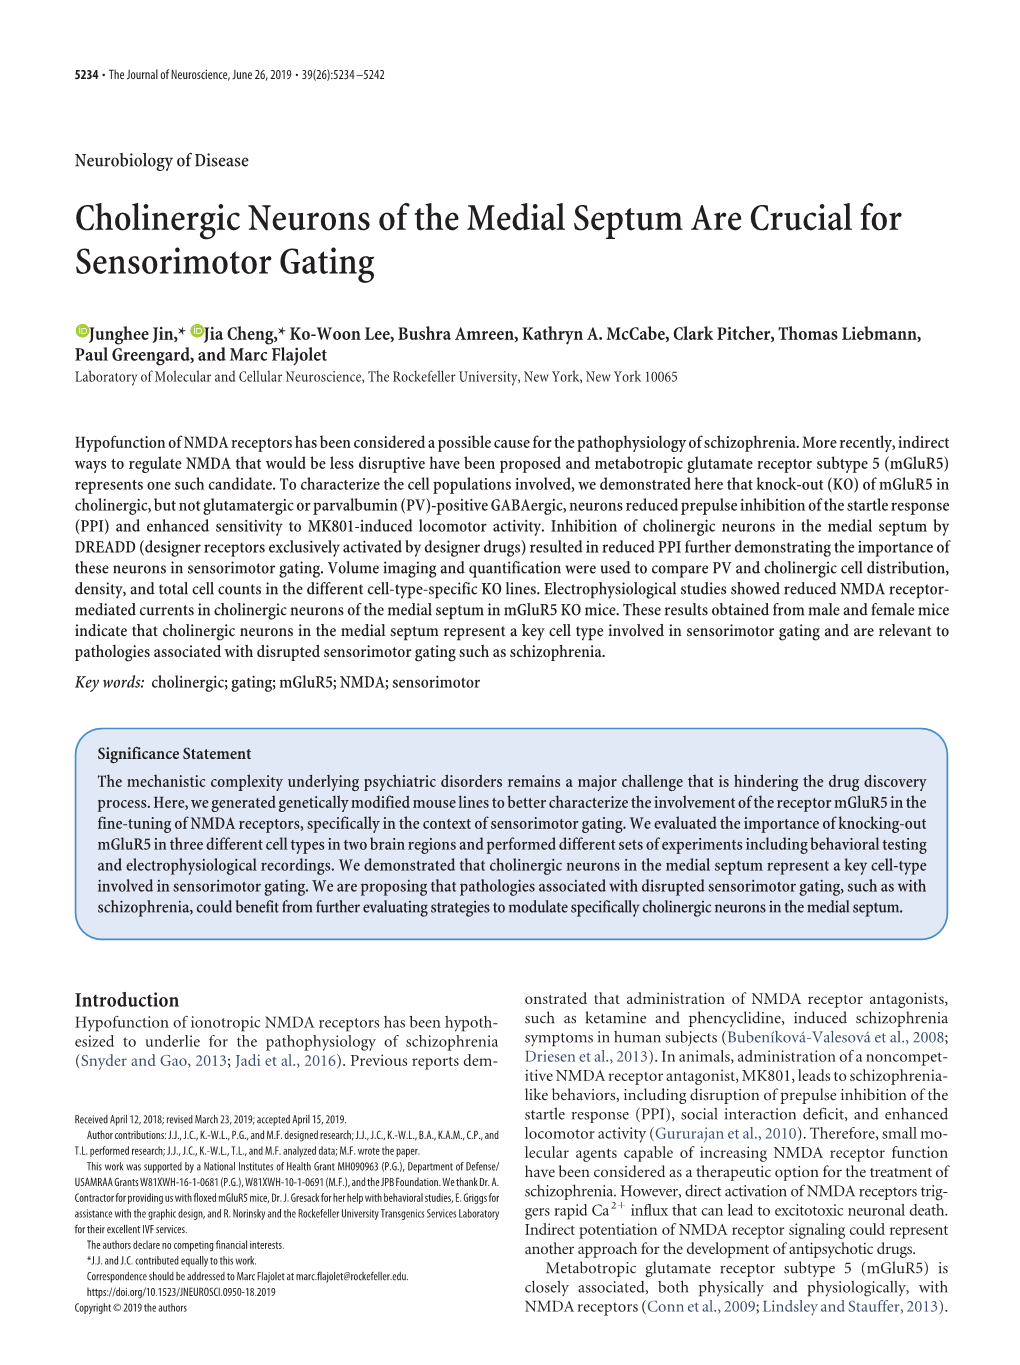 Cholinergic Neurons of the Medial Septum Are Crucial for Sensorimotor Gating